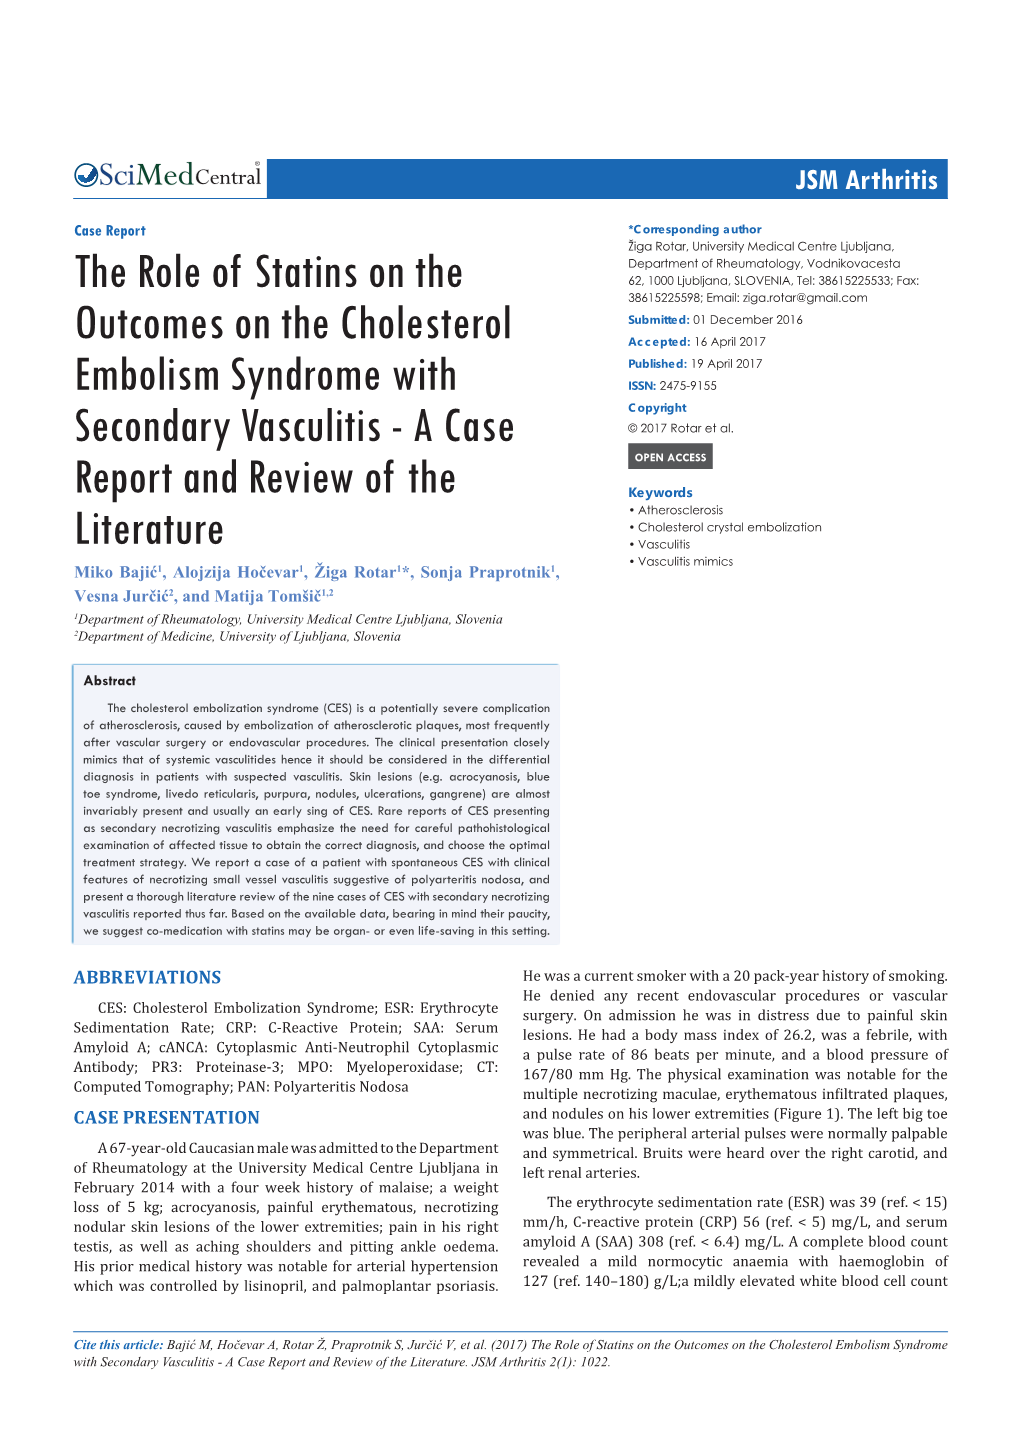 The Role of Statins on the Outcomes on the Cholesterol Embolism Syndrome with Secondary Vasculitis - a Case Report and Review of the Literature